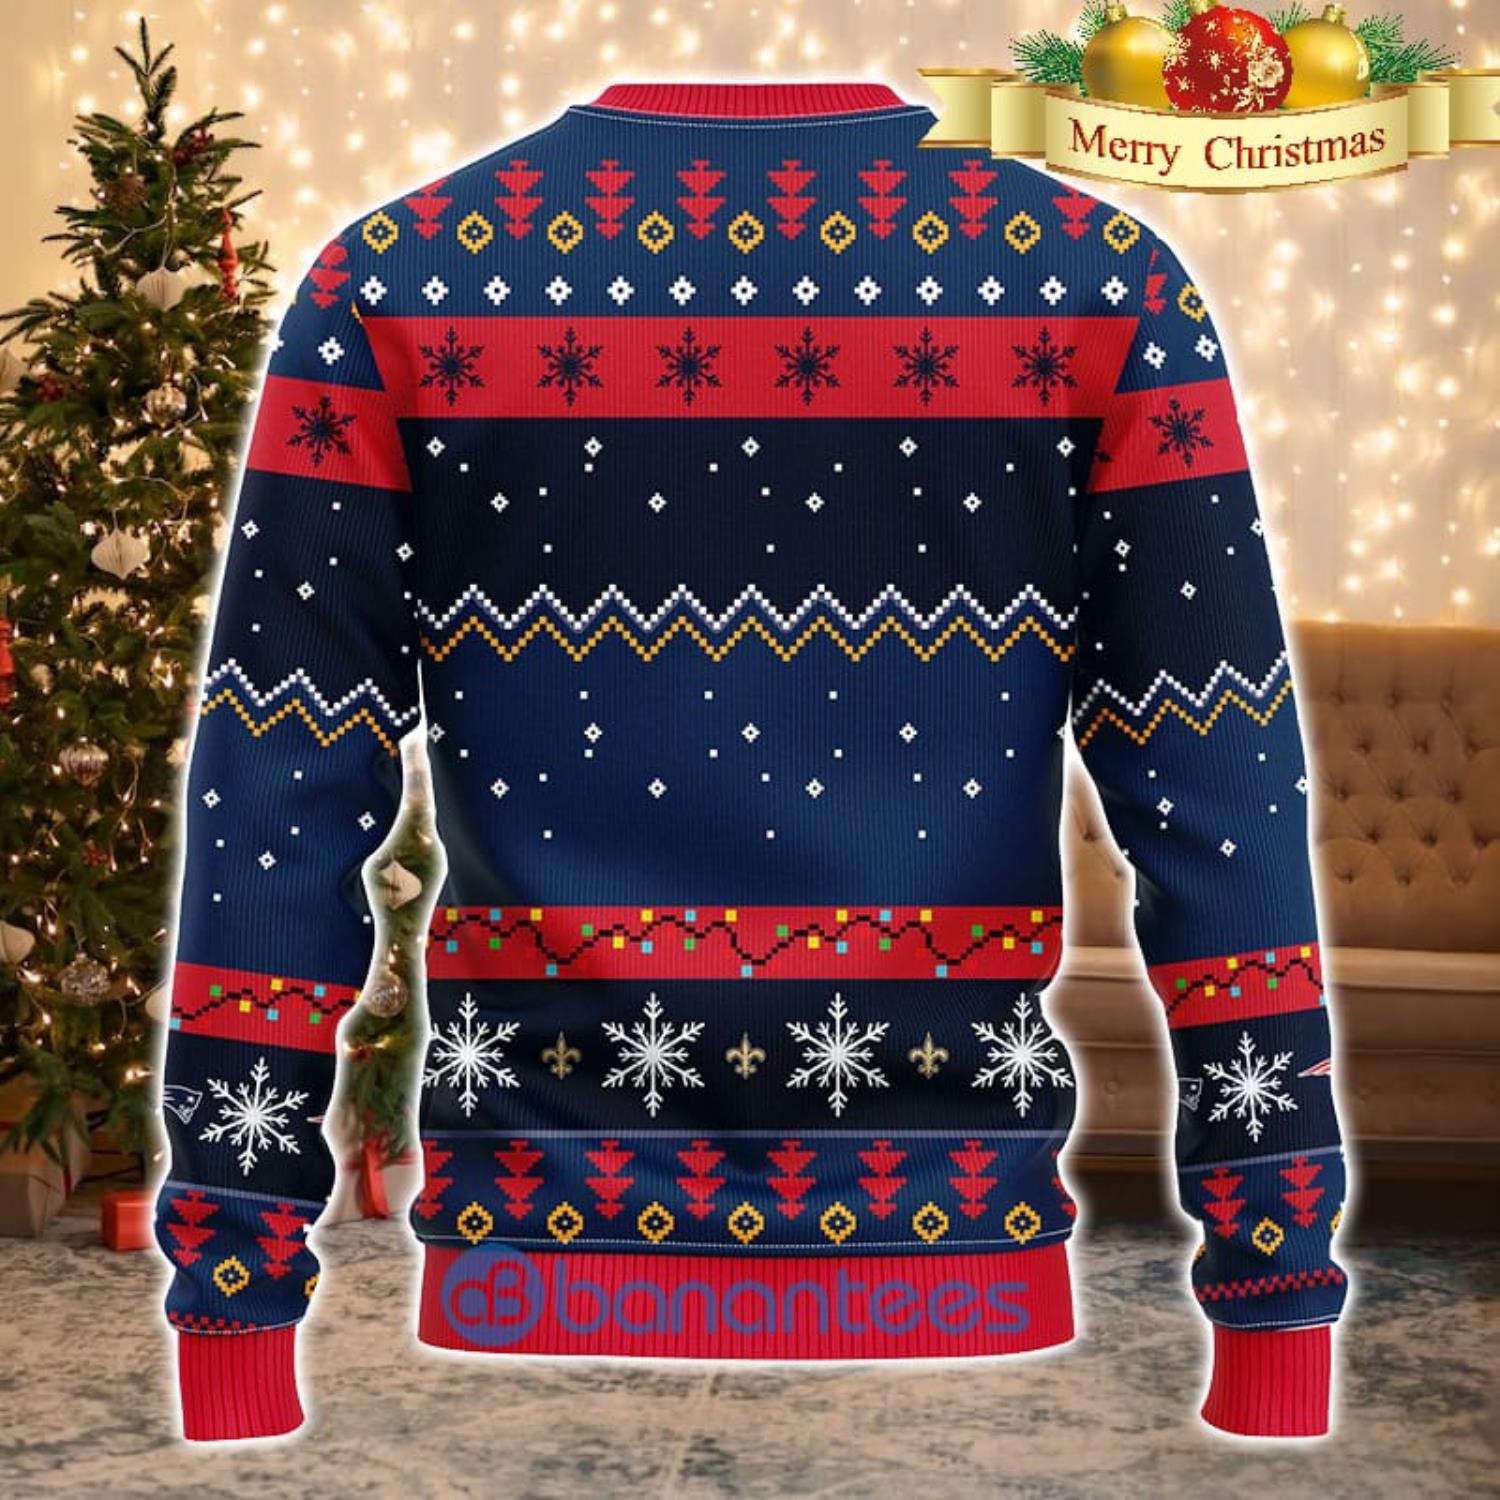 New England Patriots NFL Team Dabbing Santa Claus Funny Men And Women Christmas Gift 3D Ugly Christmas Sweater Product Photo 2